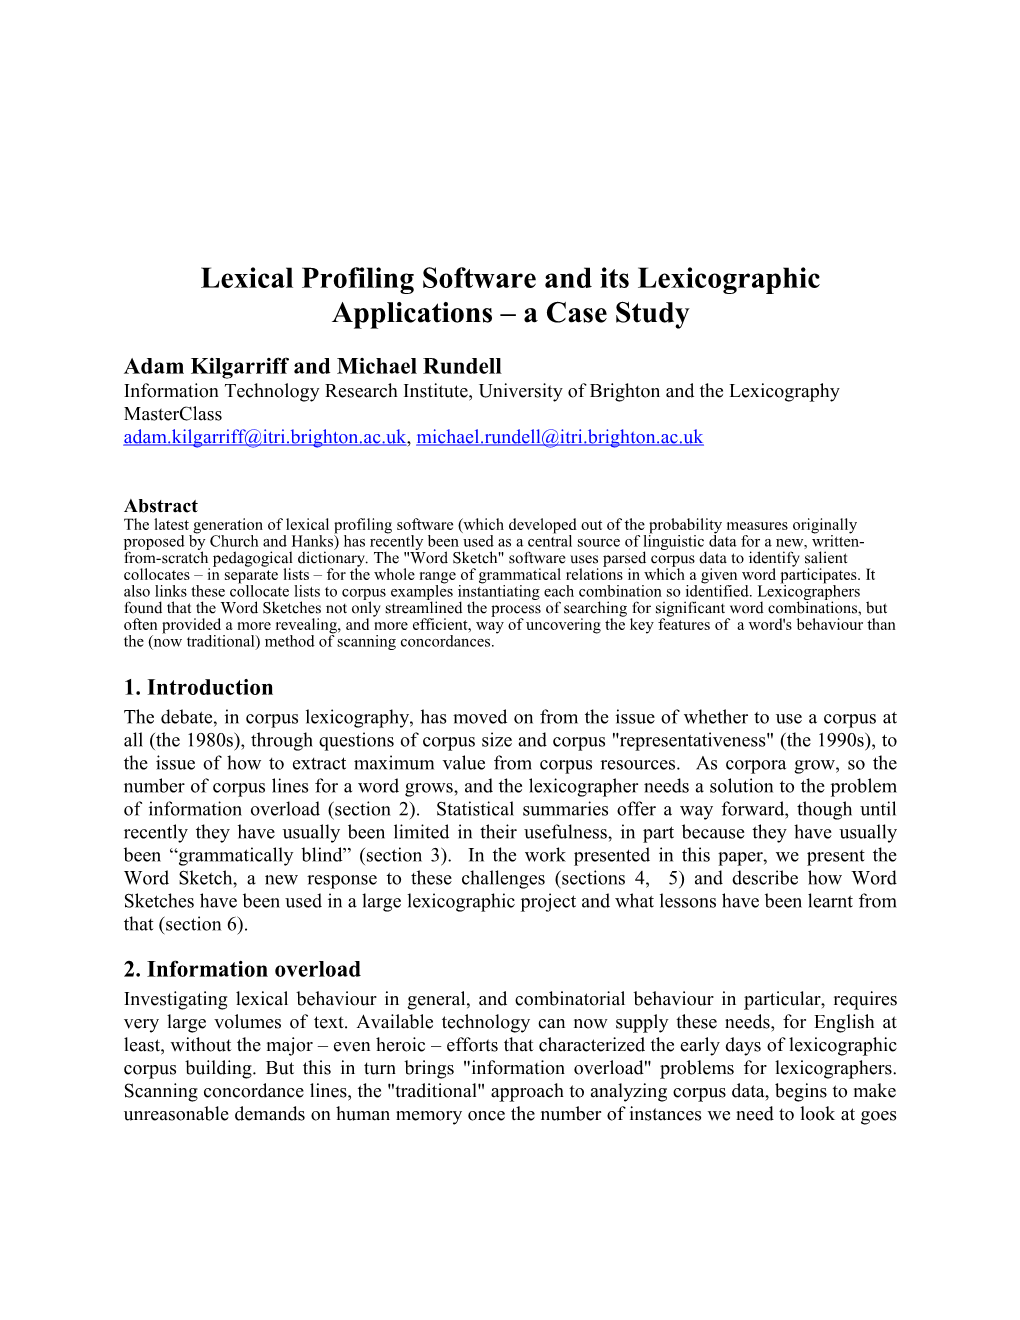 Lexical Profiling Software and Its Lexicographic Applications a Case Study